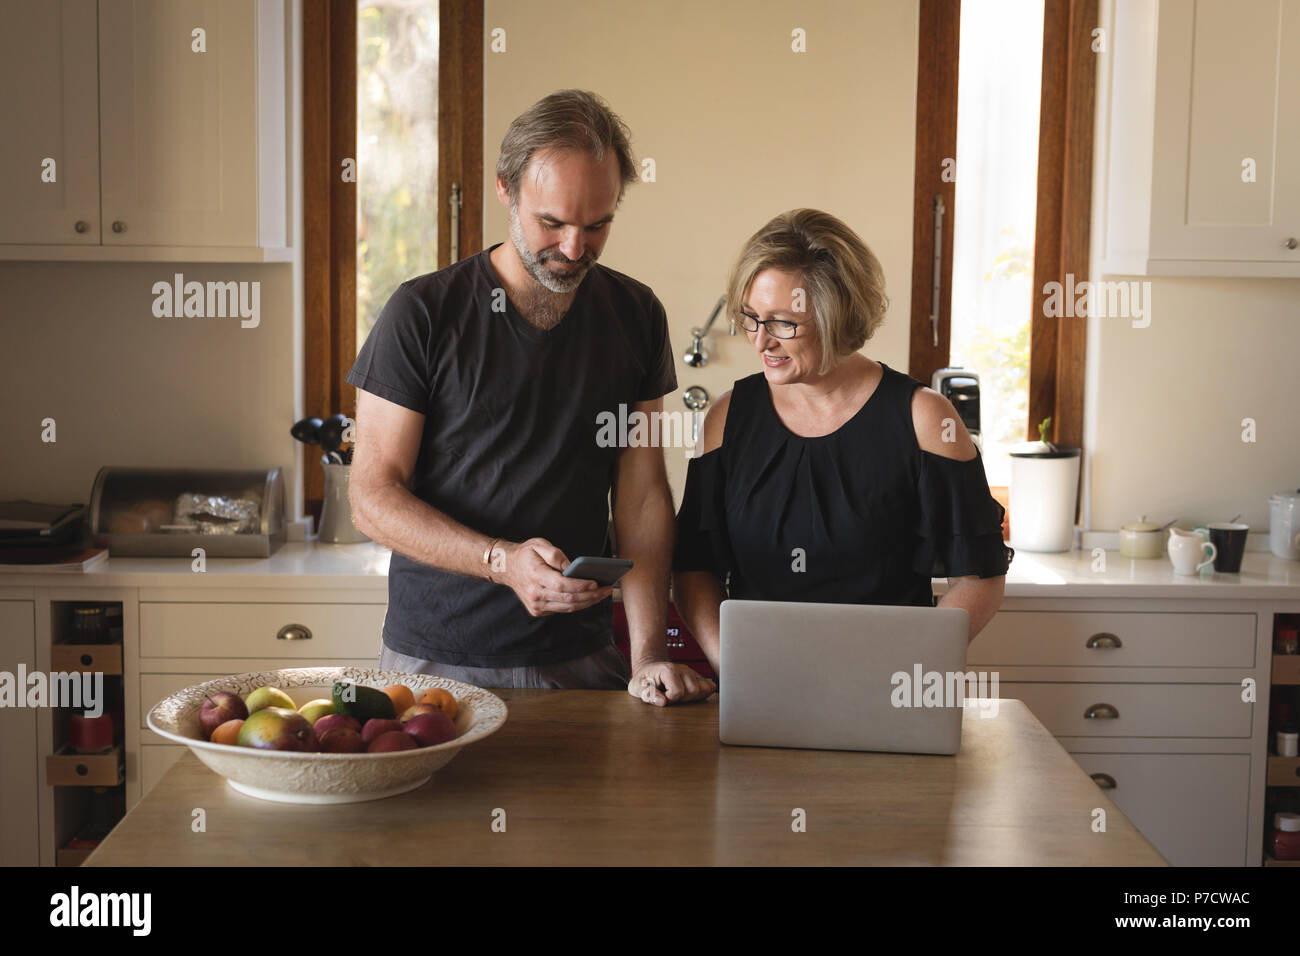 Couple using mobile phone and laptop in kitchen Banque D'Images